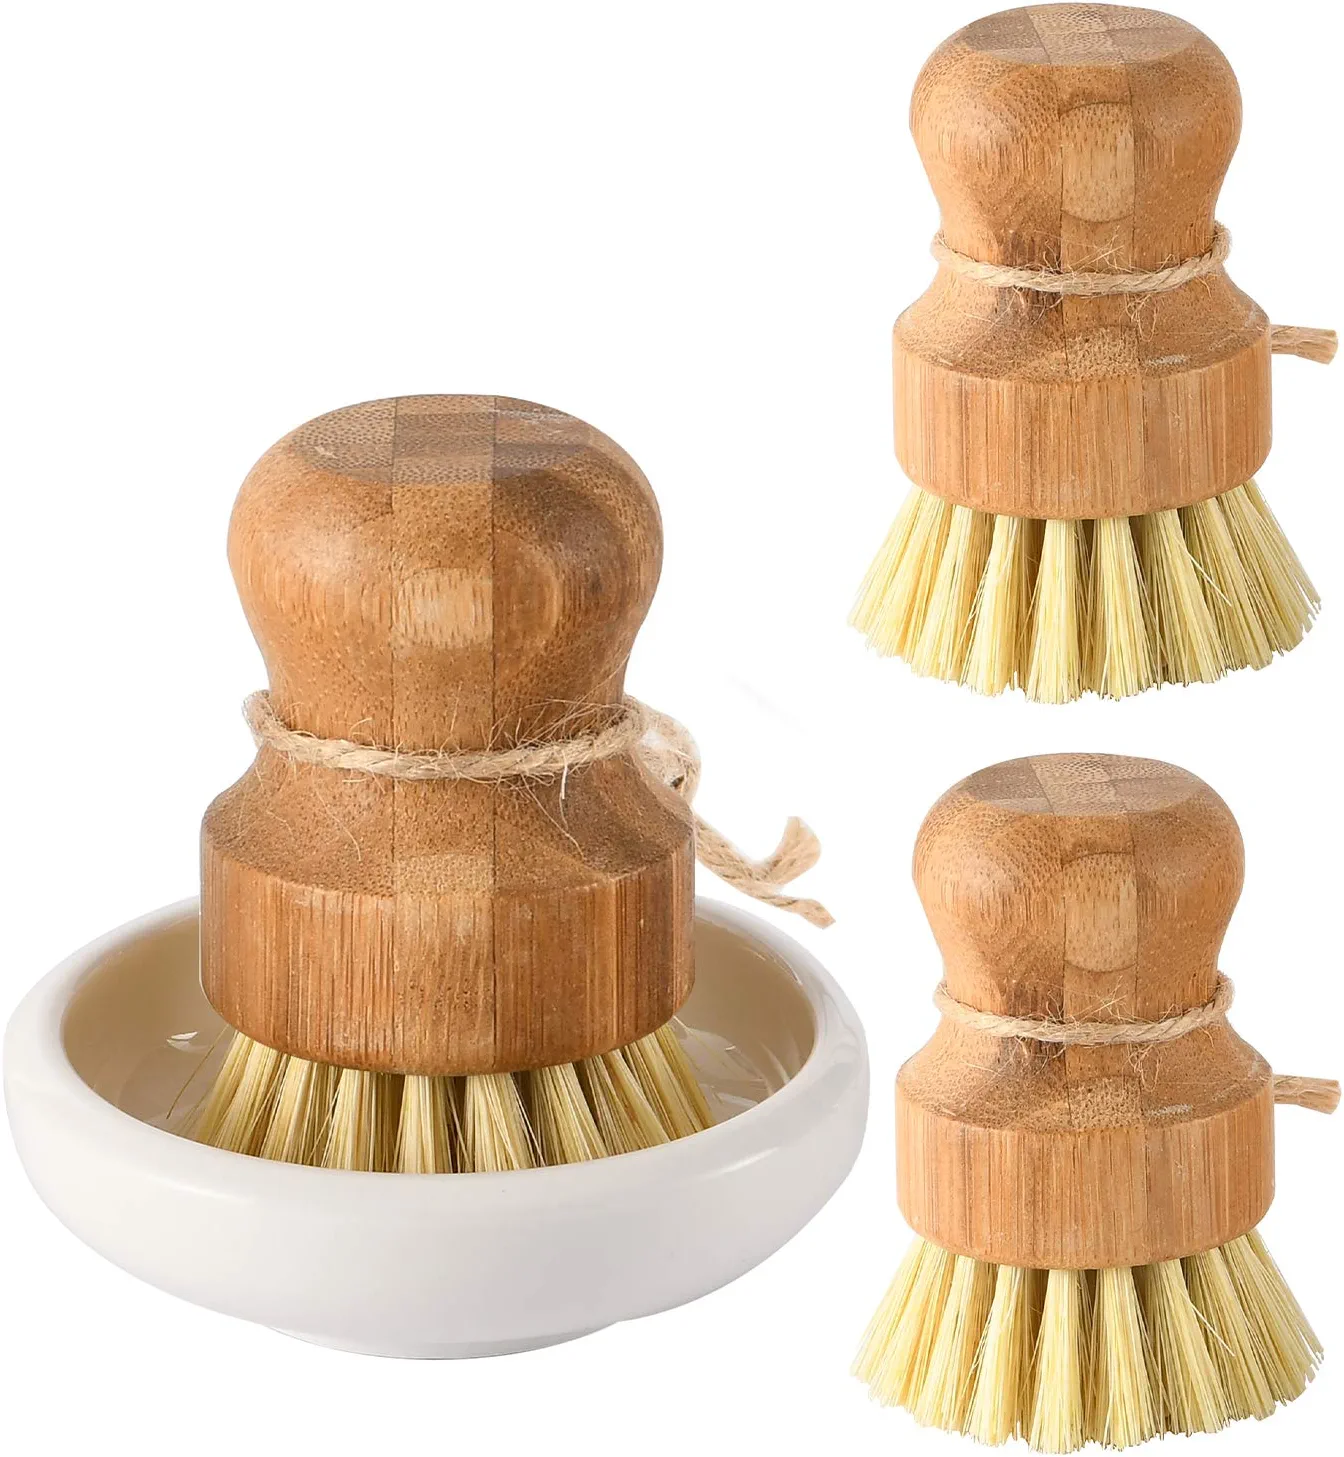 Set of 3 bamboo scrubbers and cast iron pot/pan